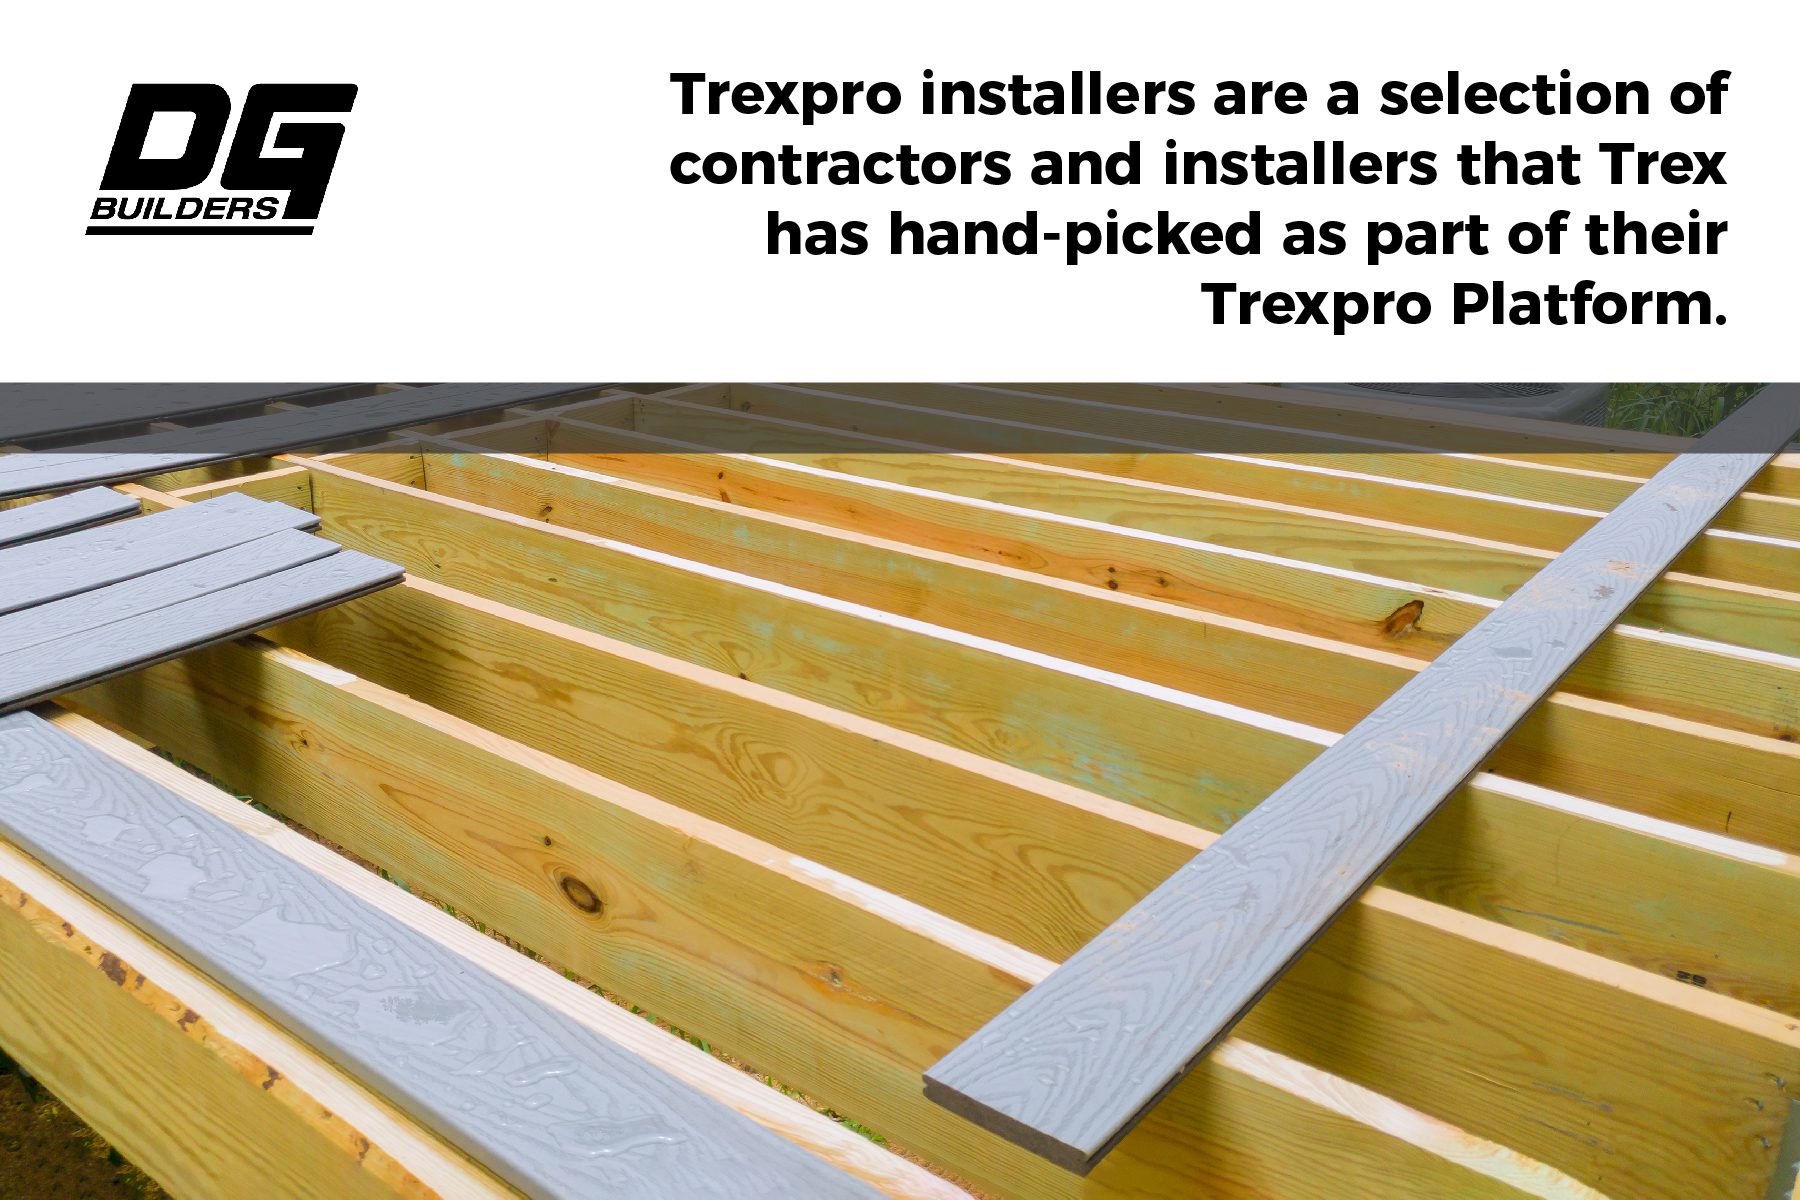 Trexpro installers are contractors who install composite decking